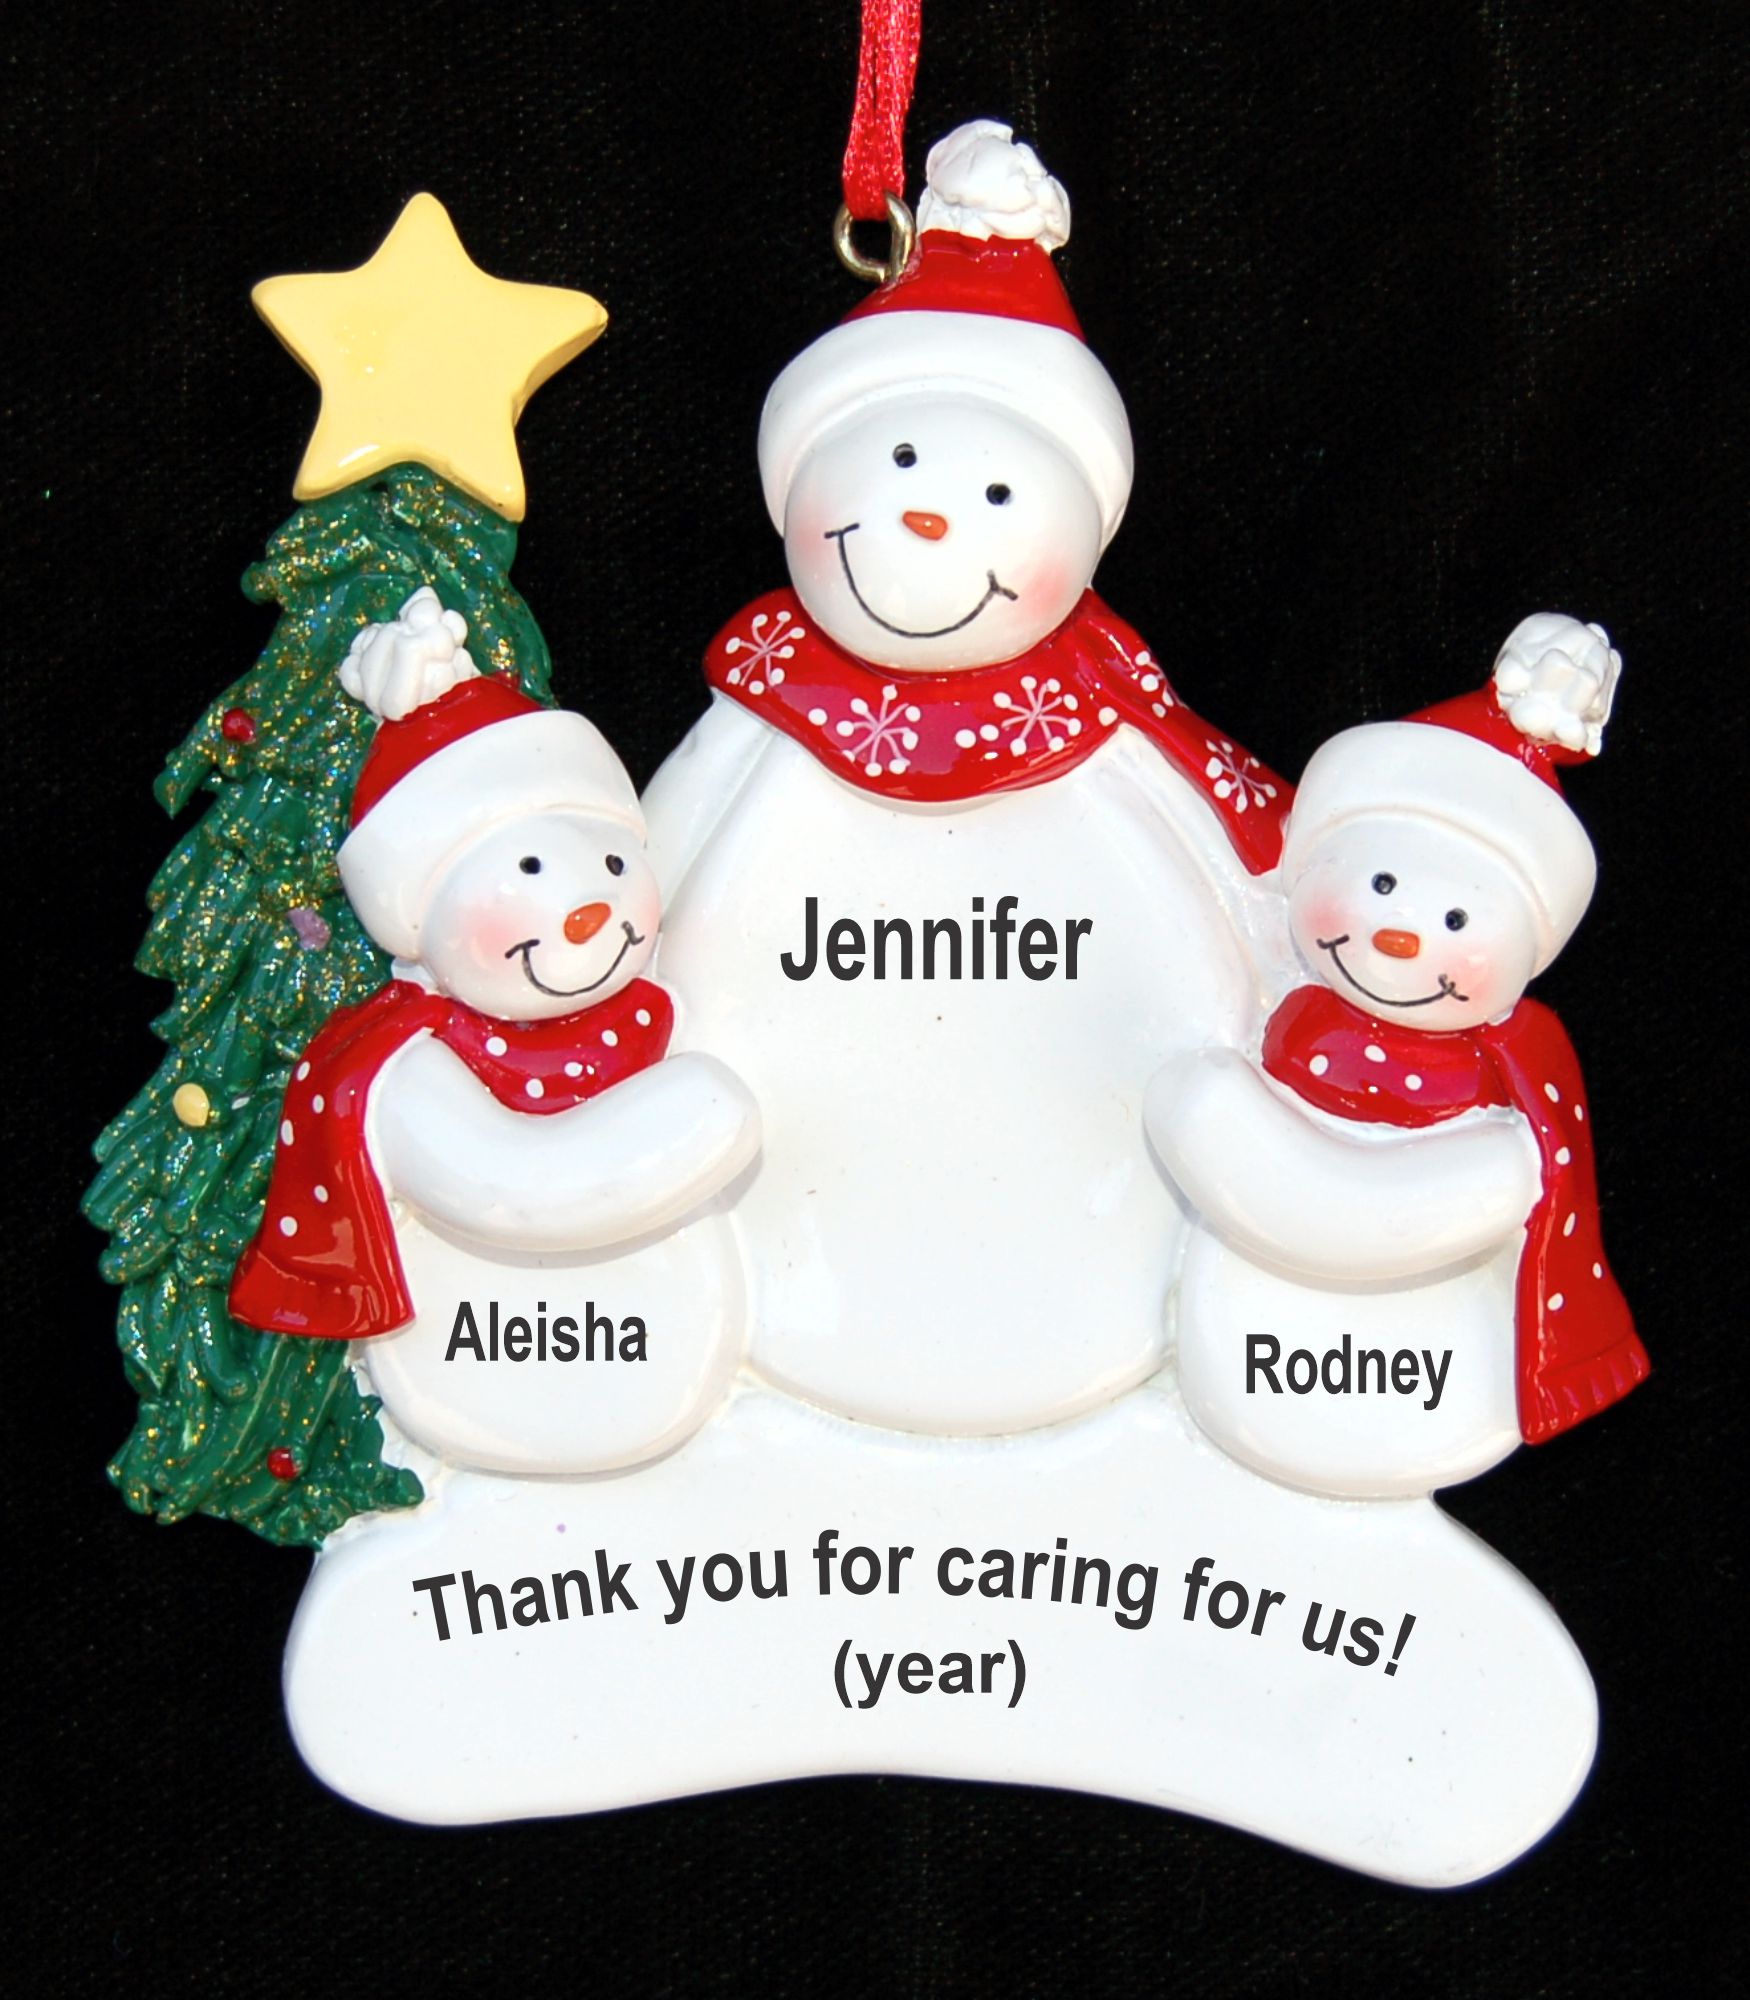 With Love to Our Babysitter or Nanny at Christmastime (2 kids) Christmas Ornament Personalized by RussellRhodes.com